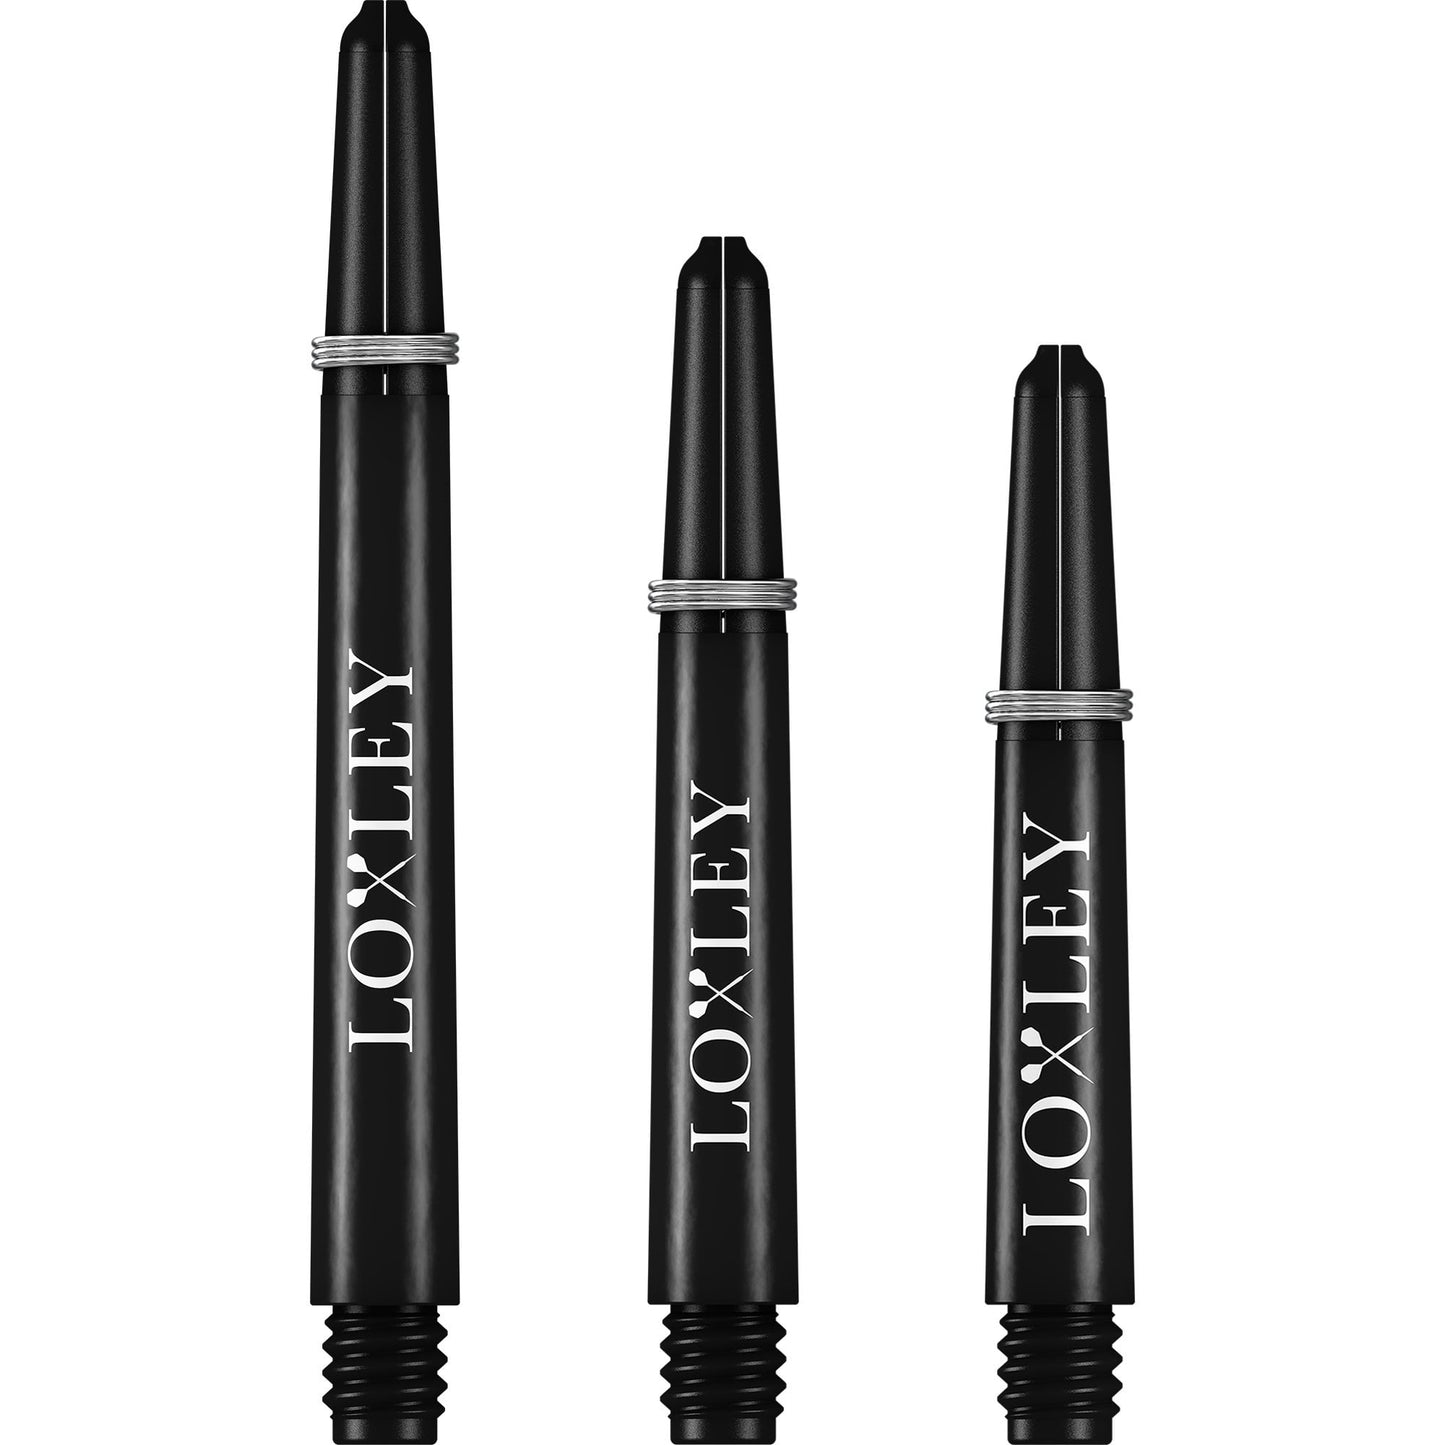 Loxley Nylon Shafts - Dart Stems with Springs - Black